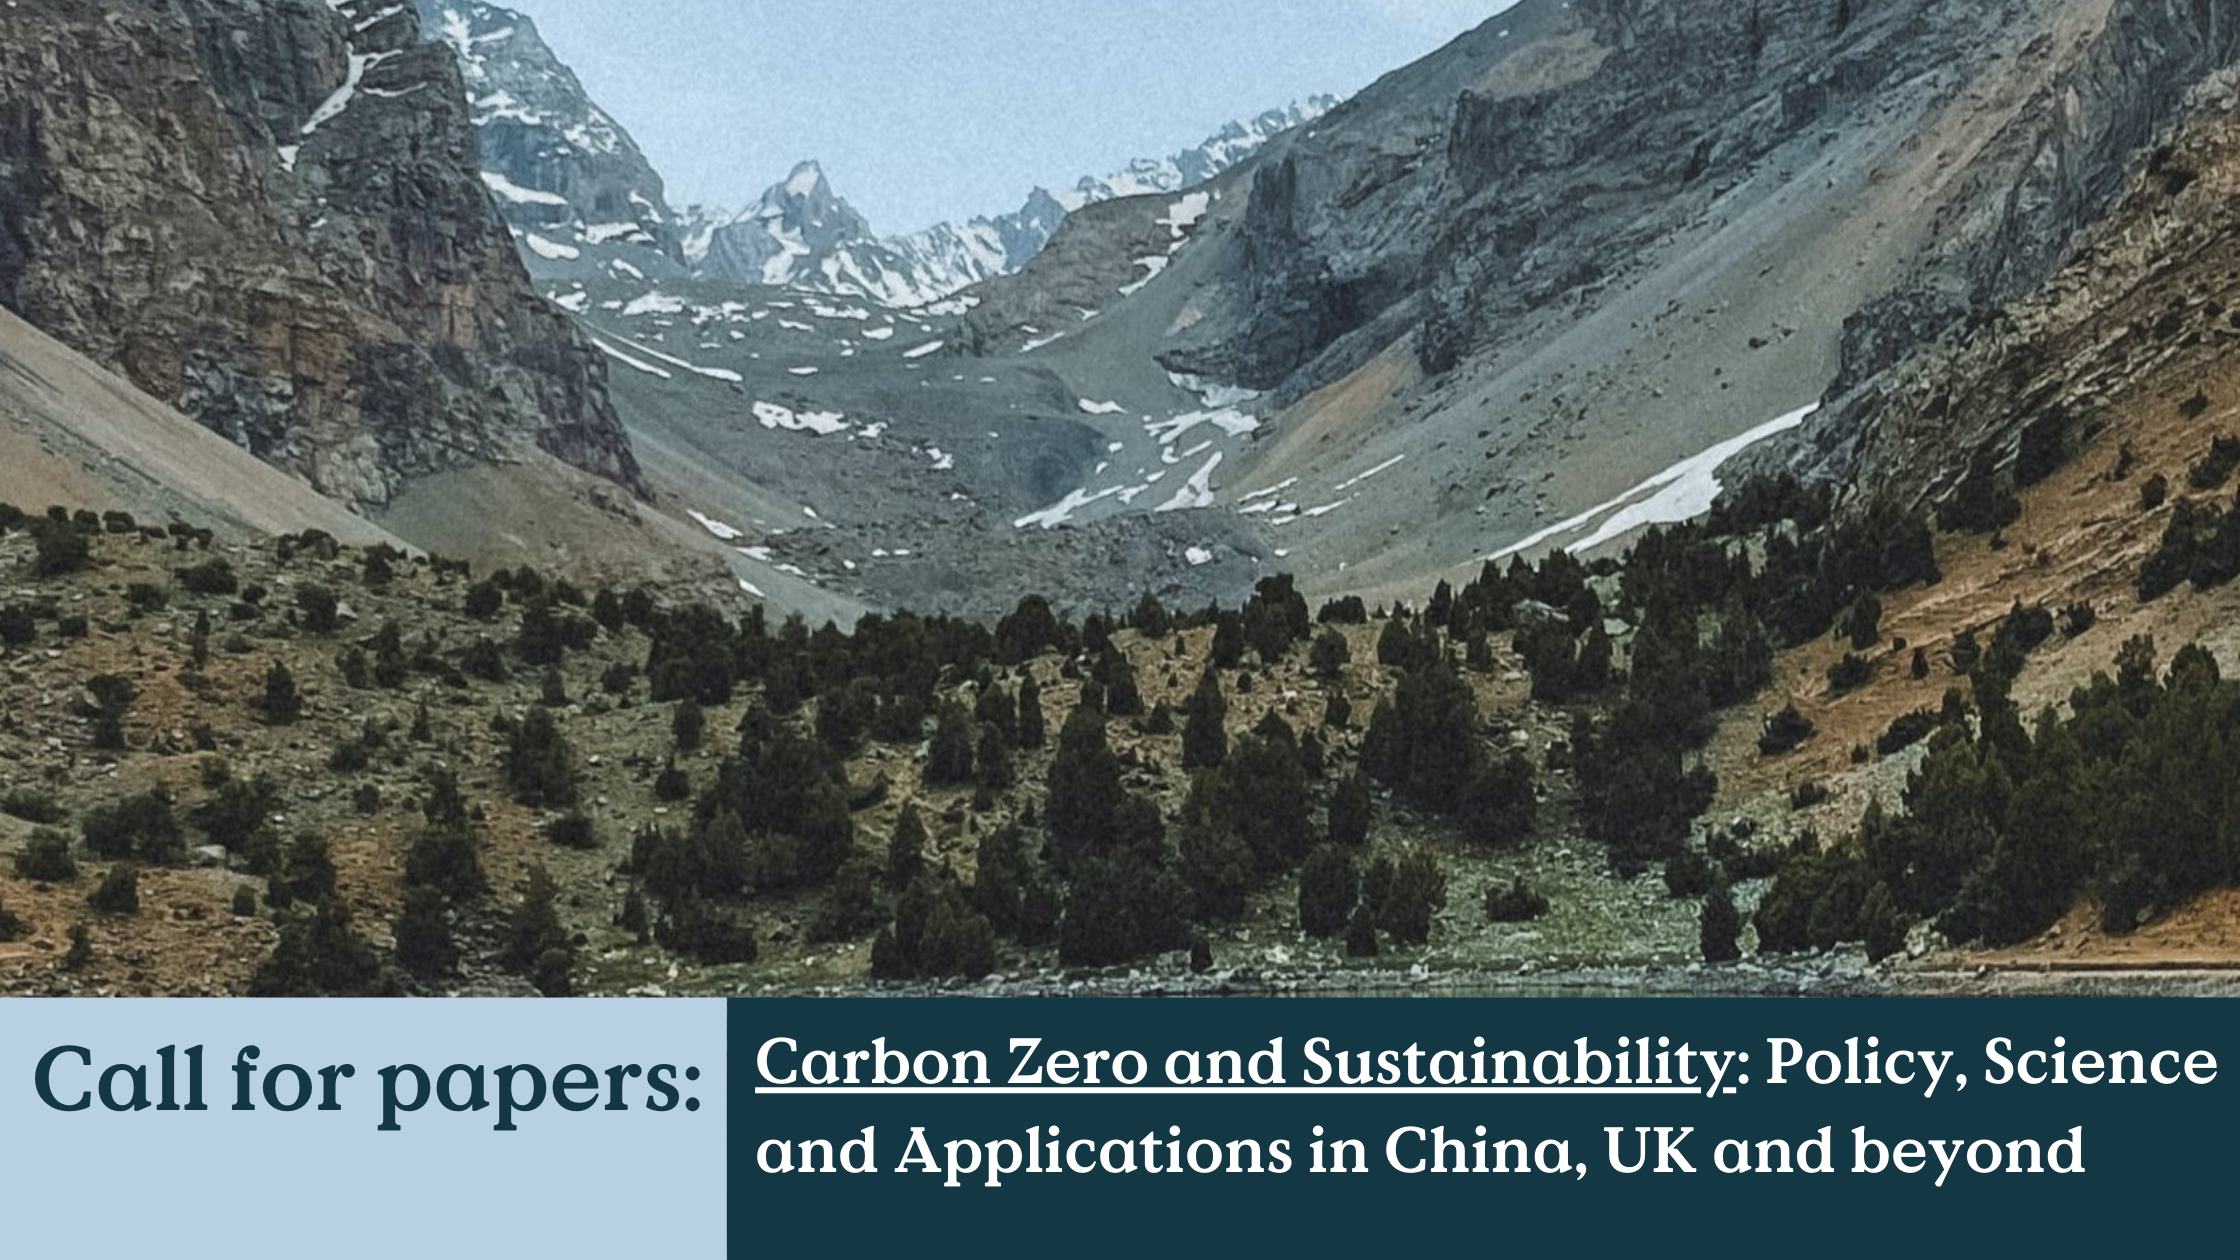 Carbon Zero and Sustainability: Policy, Science and Applications in China, UK and beyond